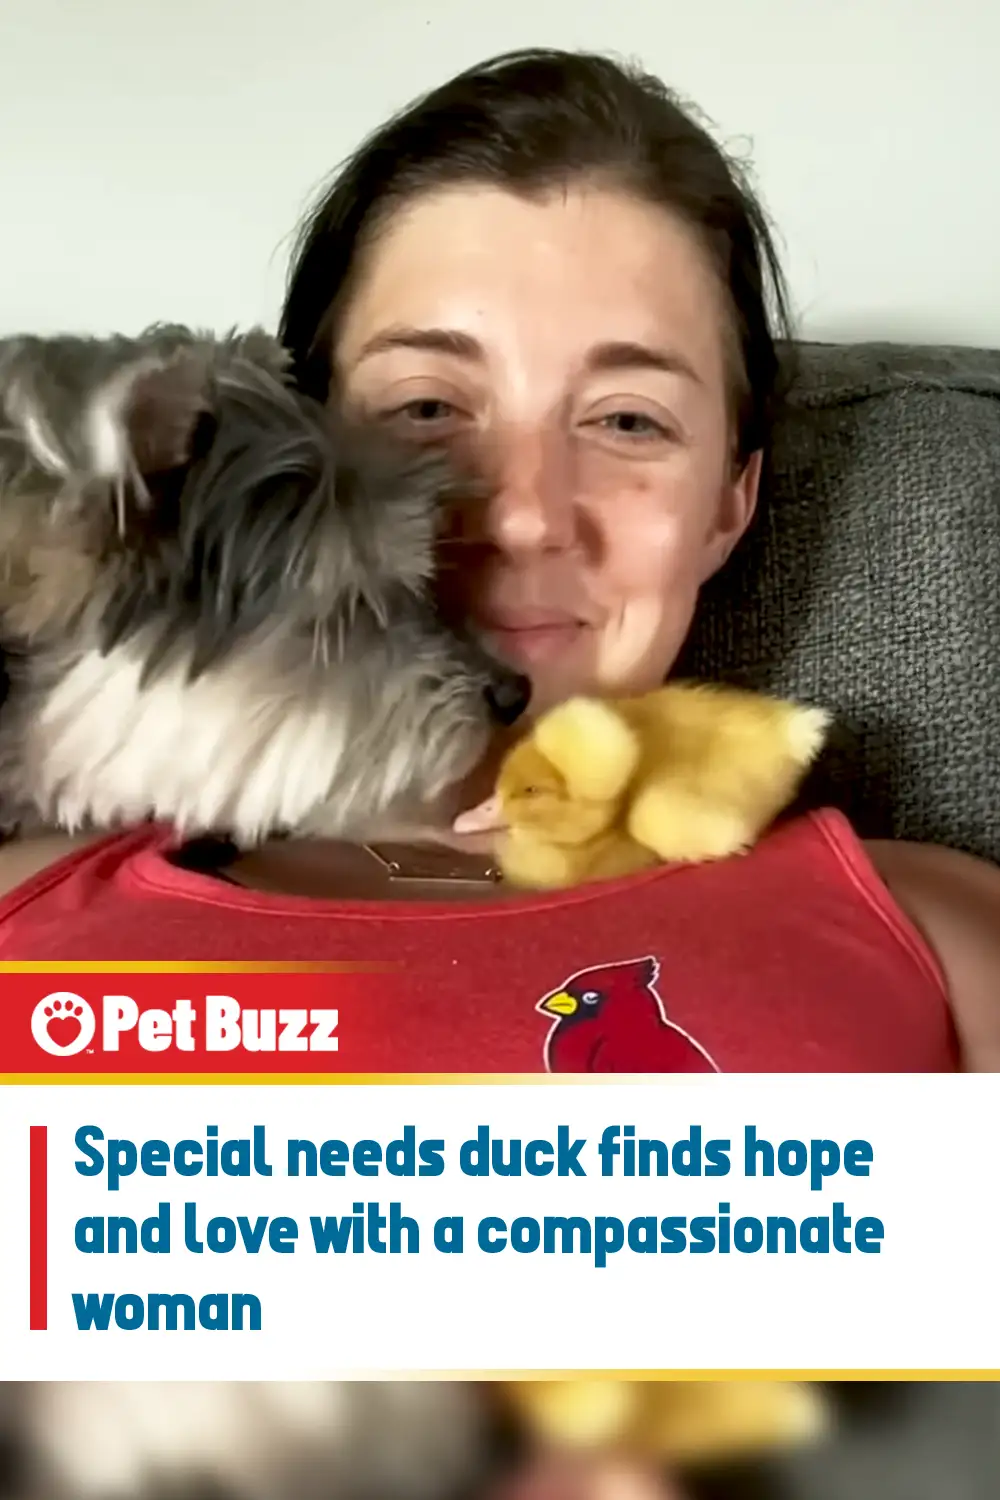 Special needs duck finds hope and love with a compassionate woman